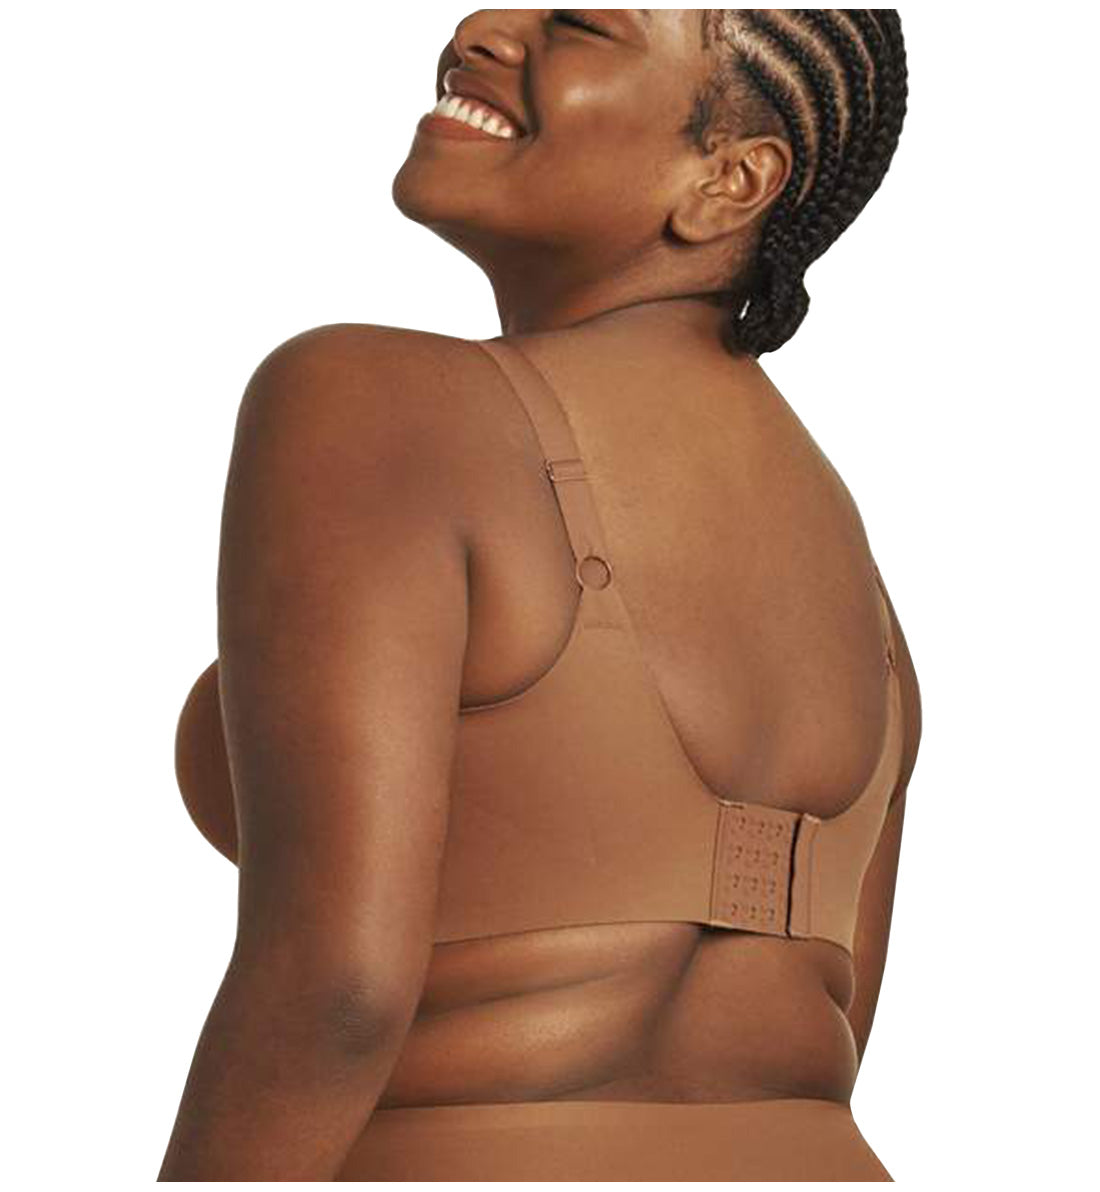 Evelyn &amp; Bobbie BEYOND Adjustable Bra (1732),Small,Clay - Clay,Small